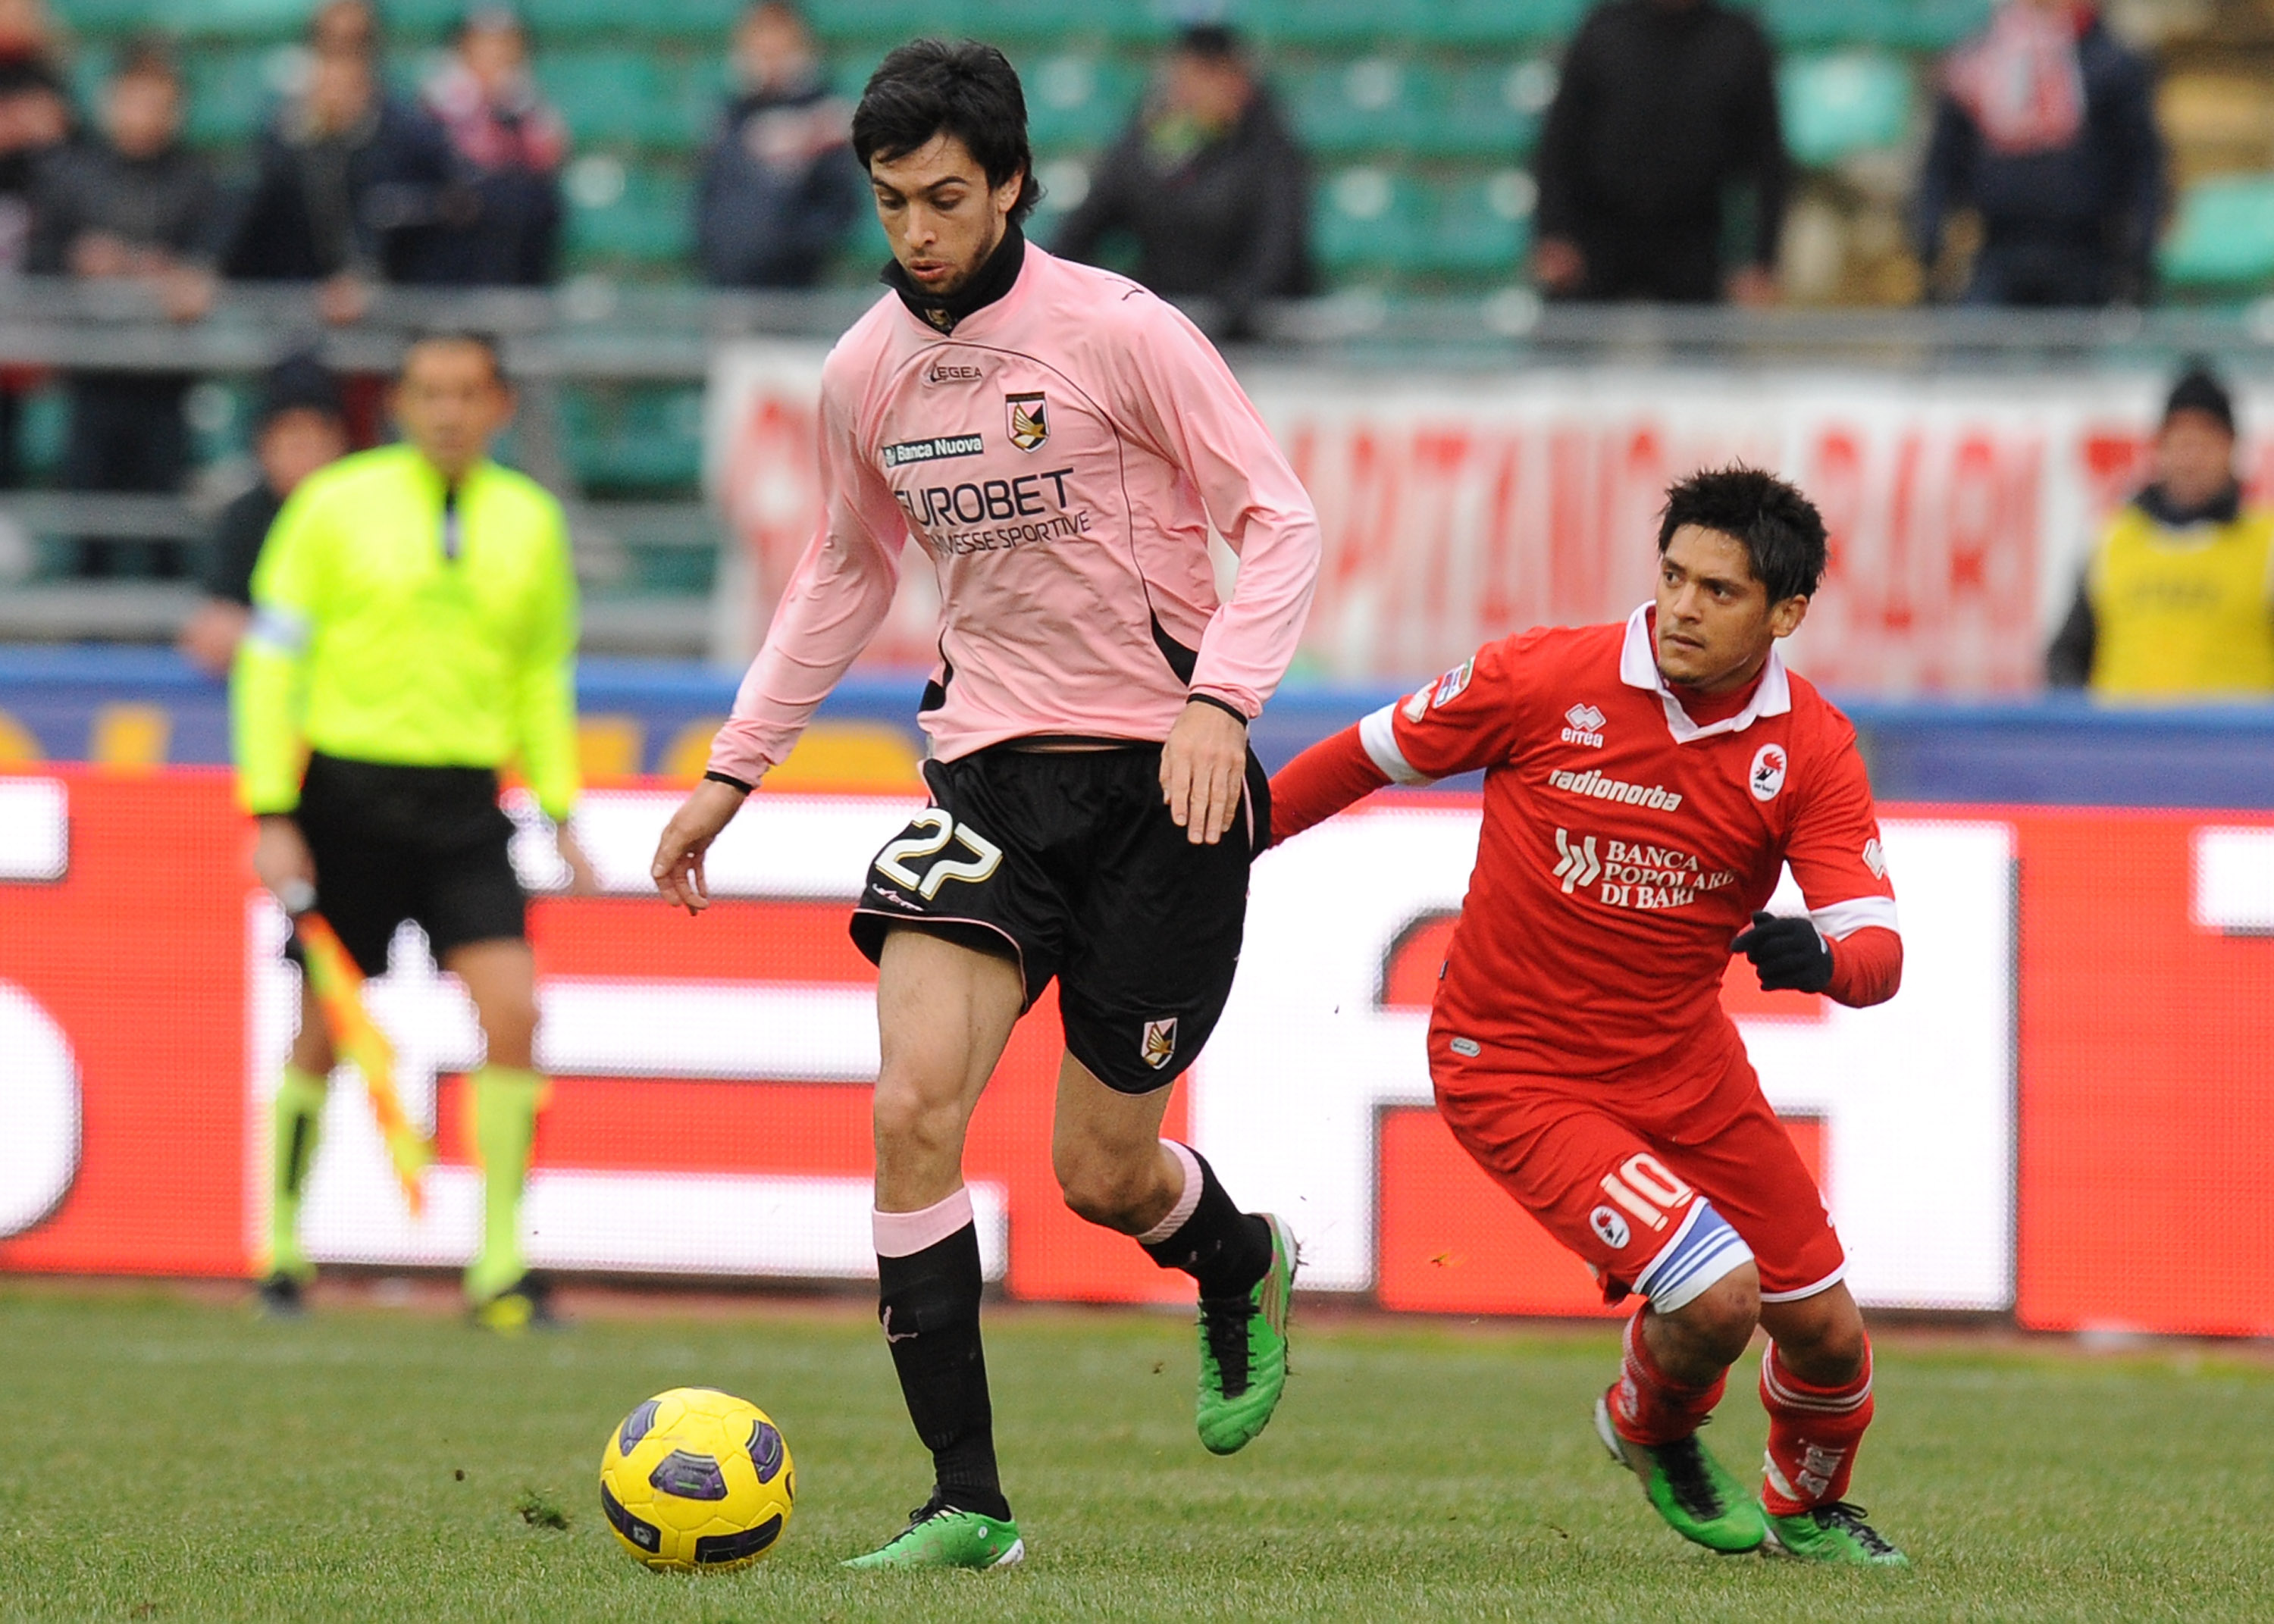 BARI, ITALY - DECEMBER 19: Javier Pastore (L) of Palermo holds off the challenge from Victor Barreto of Bari during the Serie A match between Bari and Palermo at Stadio San Nicola on December 19, 2010 in Bari, Italy.  (Photo by Tullio M. Puglia/Getty Imag